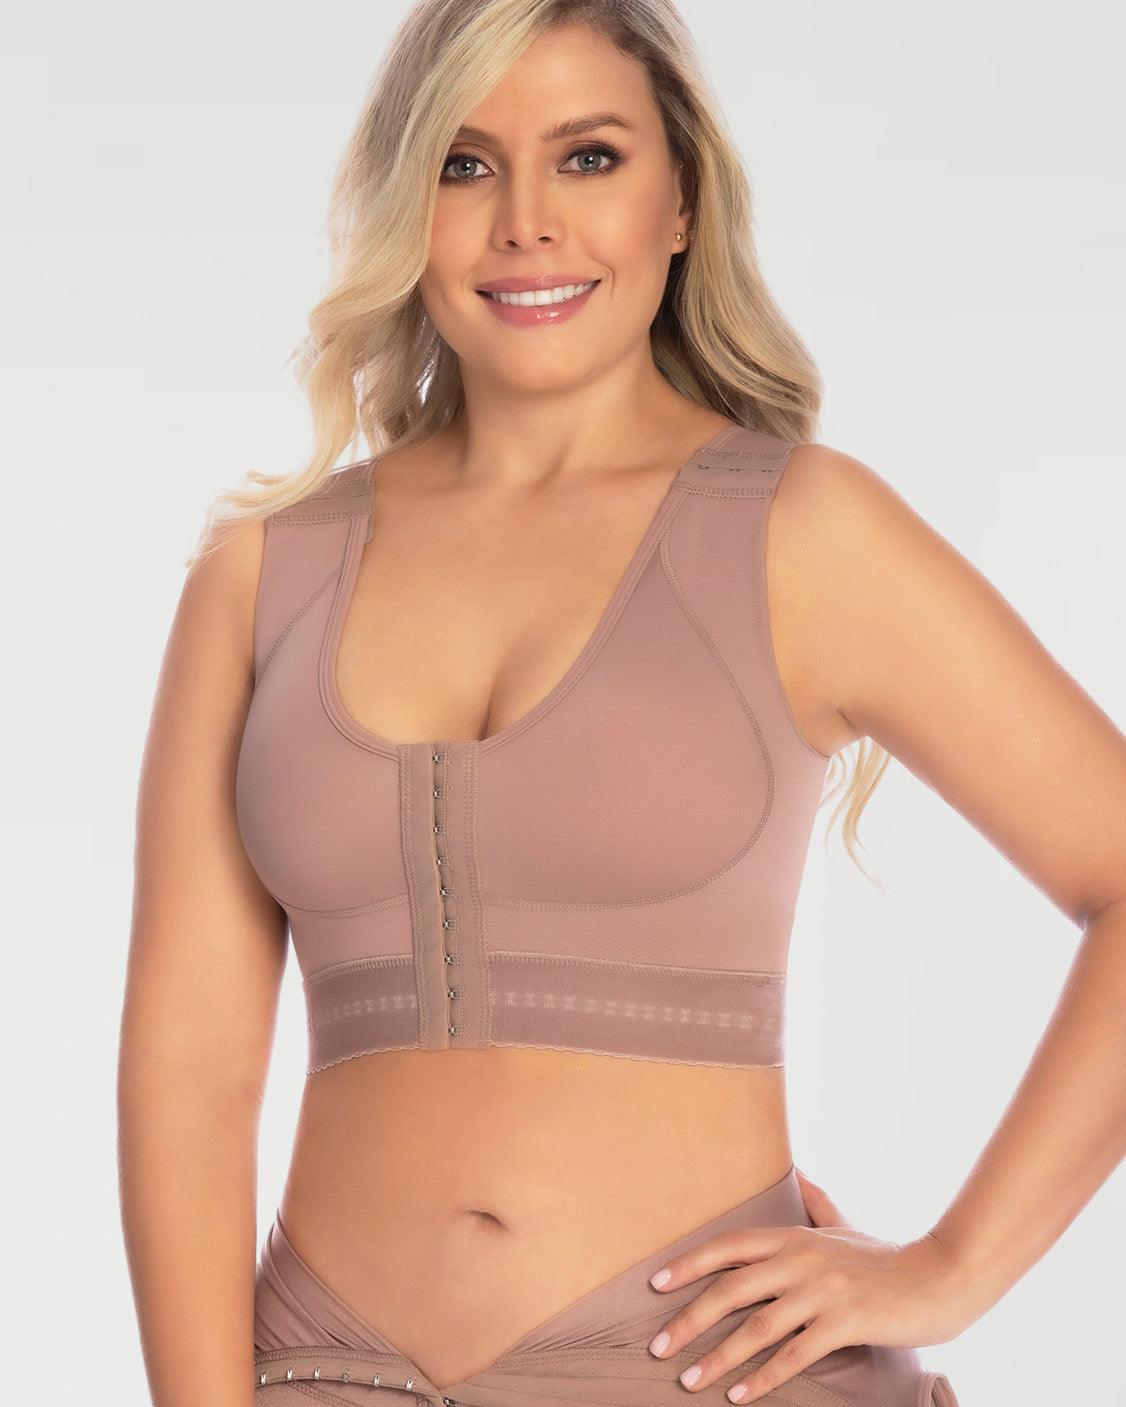 DELIE GIRDLES | FIT360 POST-SURGICAL BRA REF 9348 - Wishe